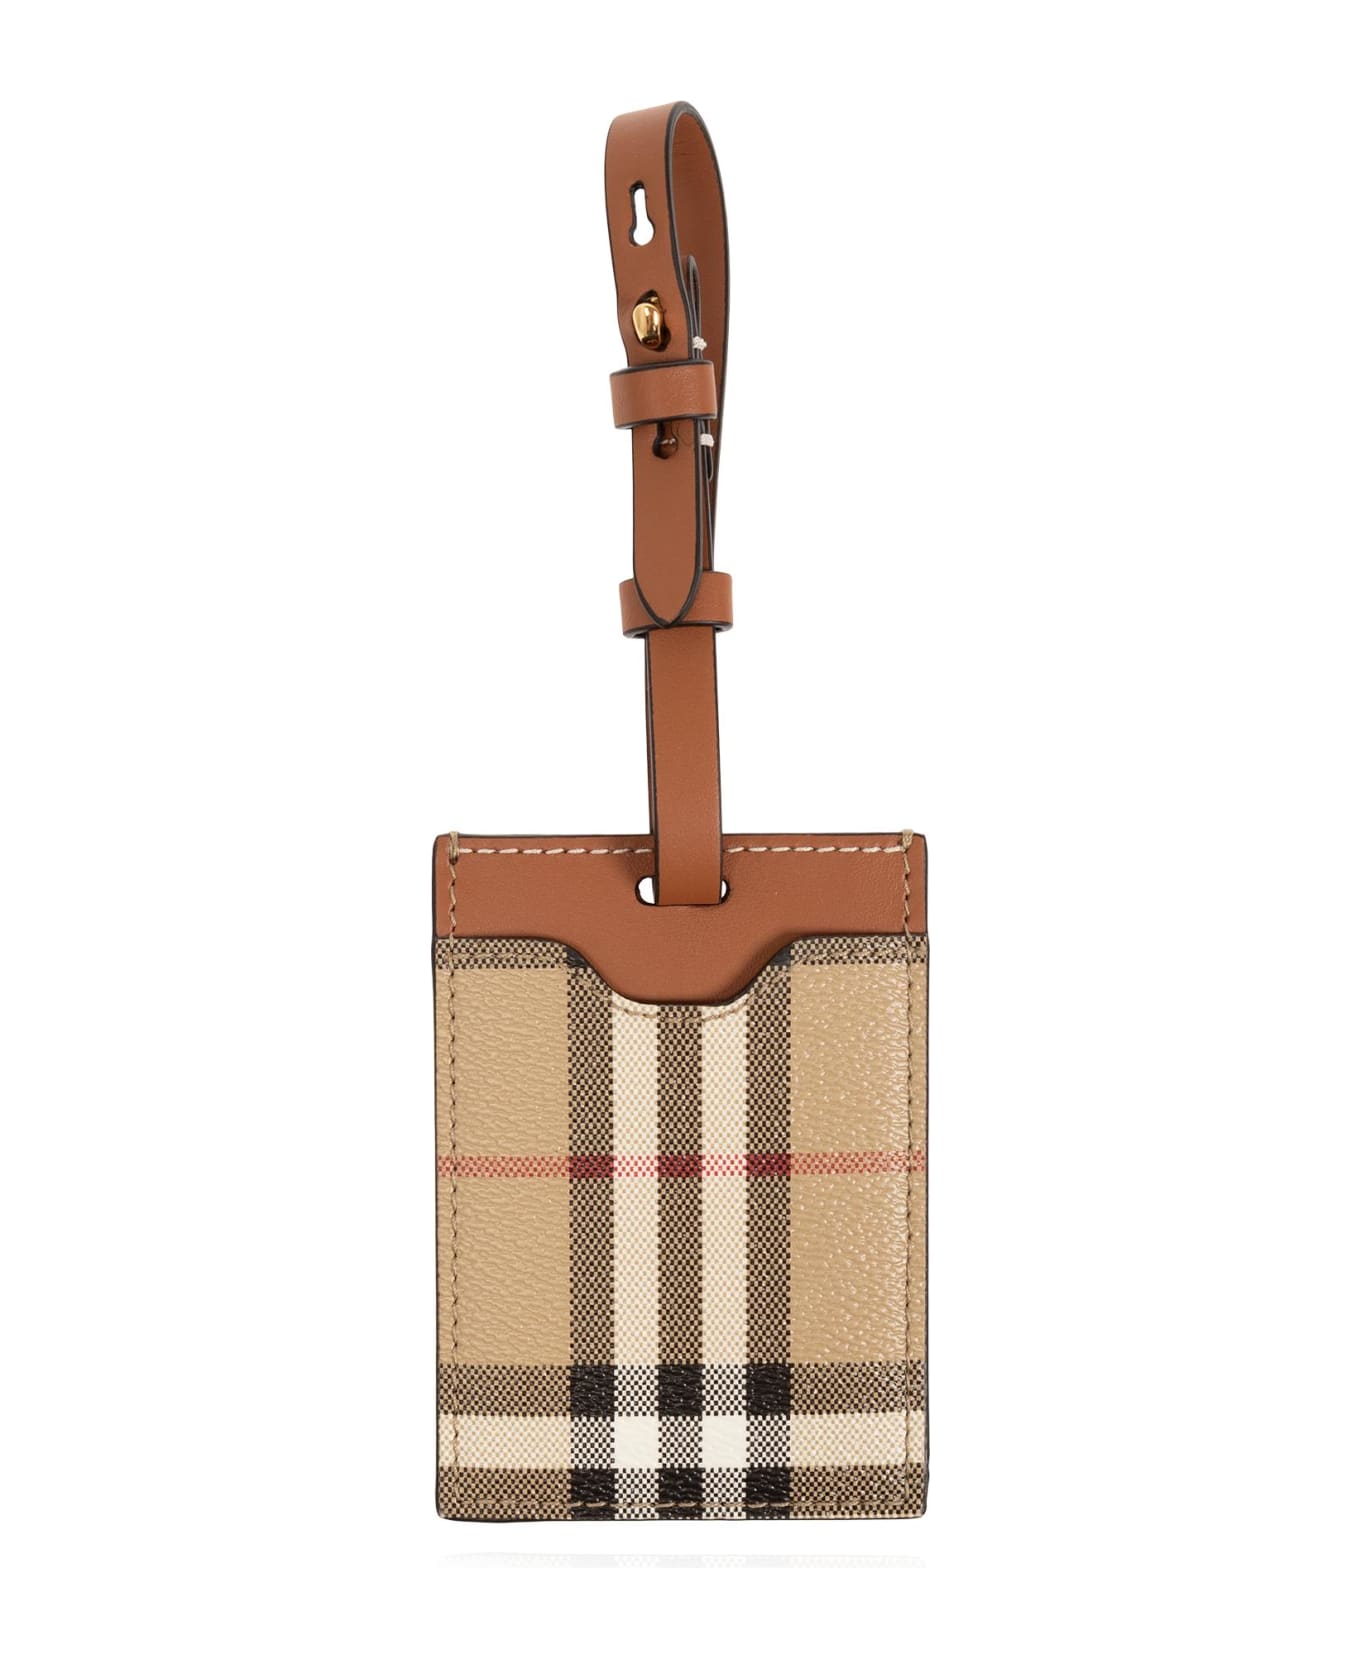 Burberry Luggage Tag - Archive Beige